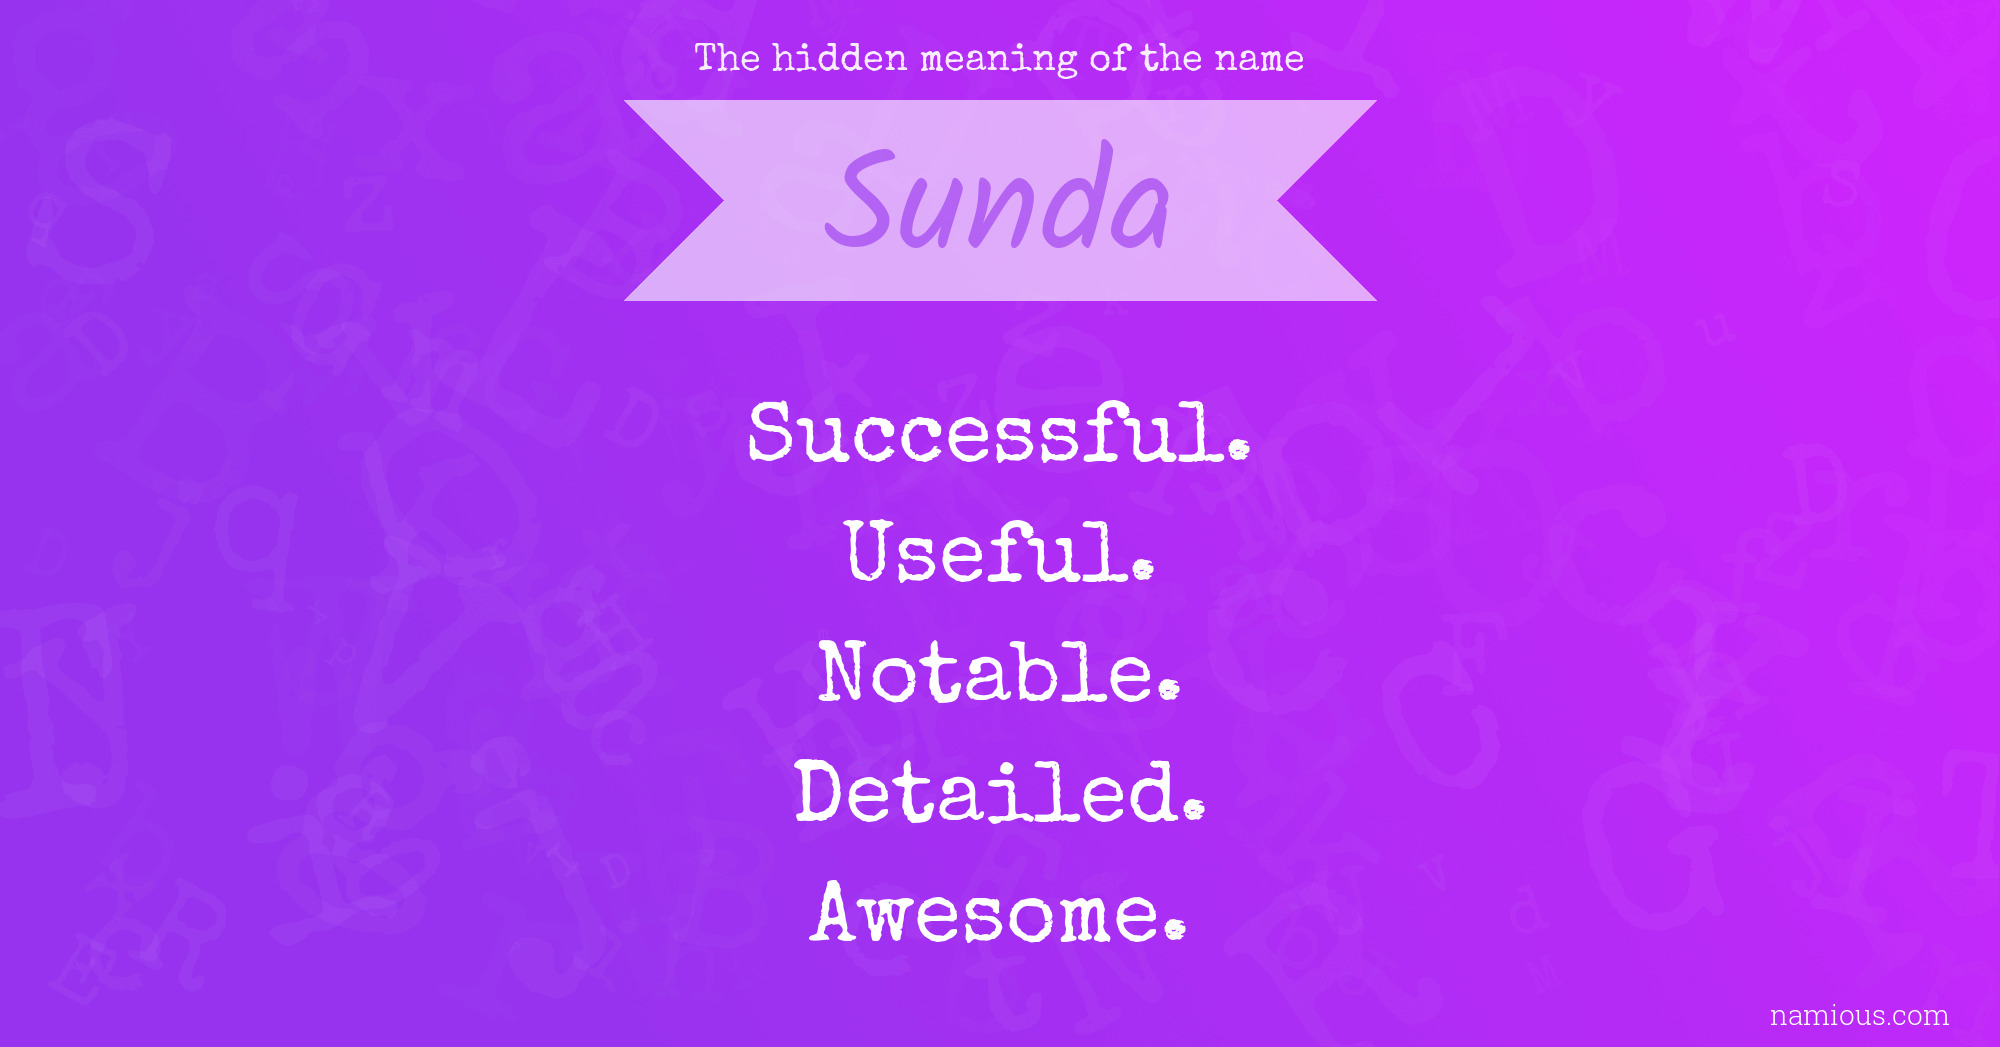 The hidden meaning of the name Sunda